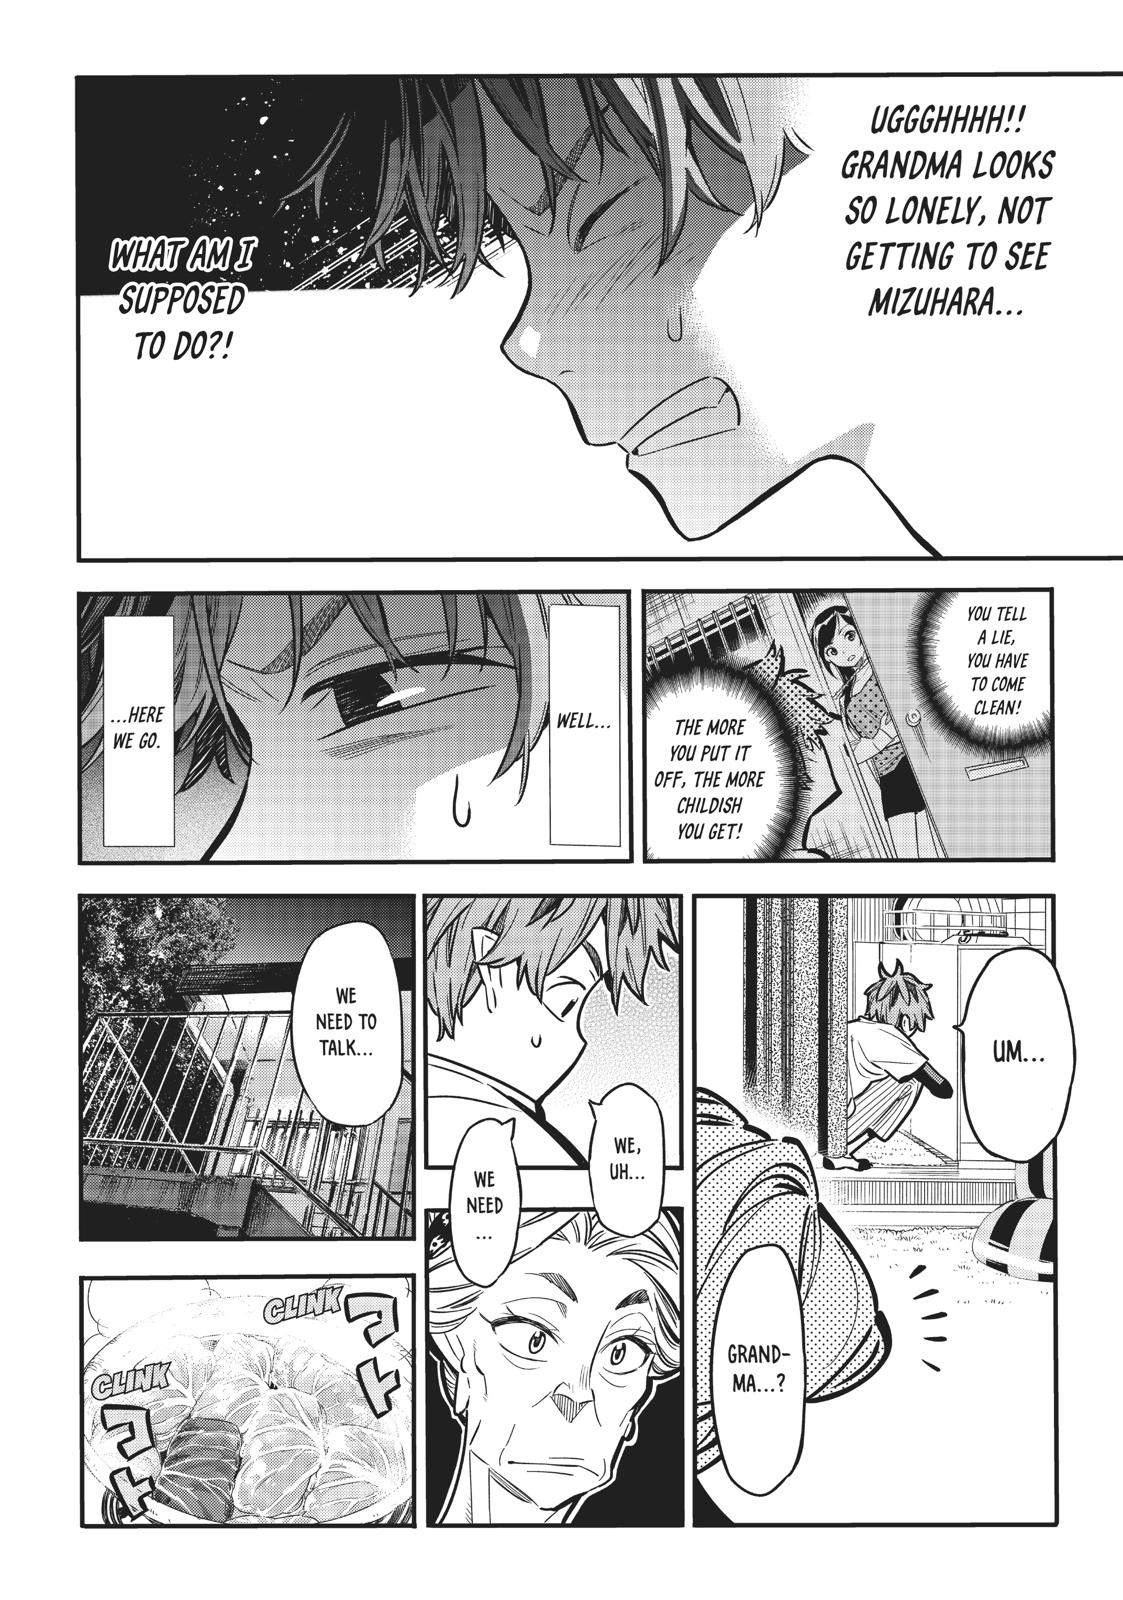 Rent A GirlFriend, Chapter  3 image 018